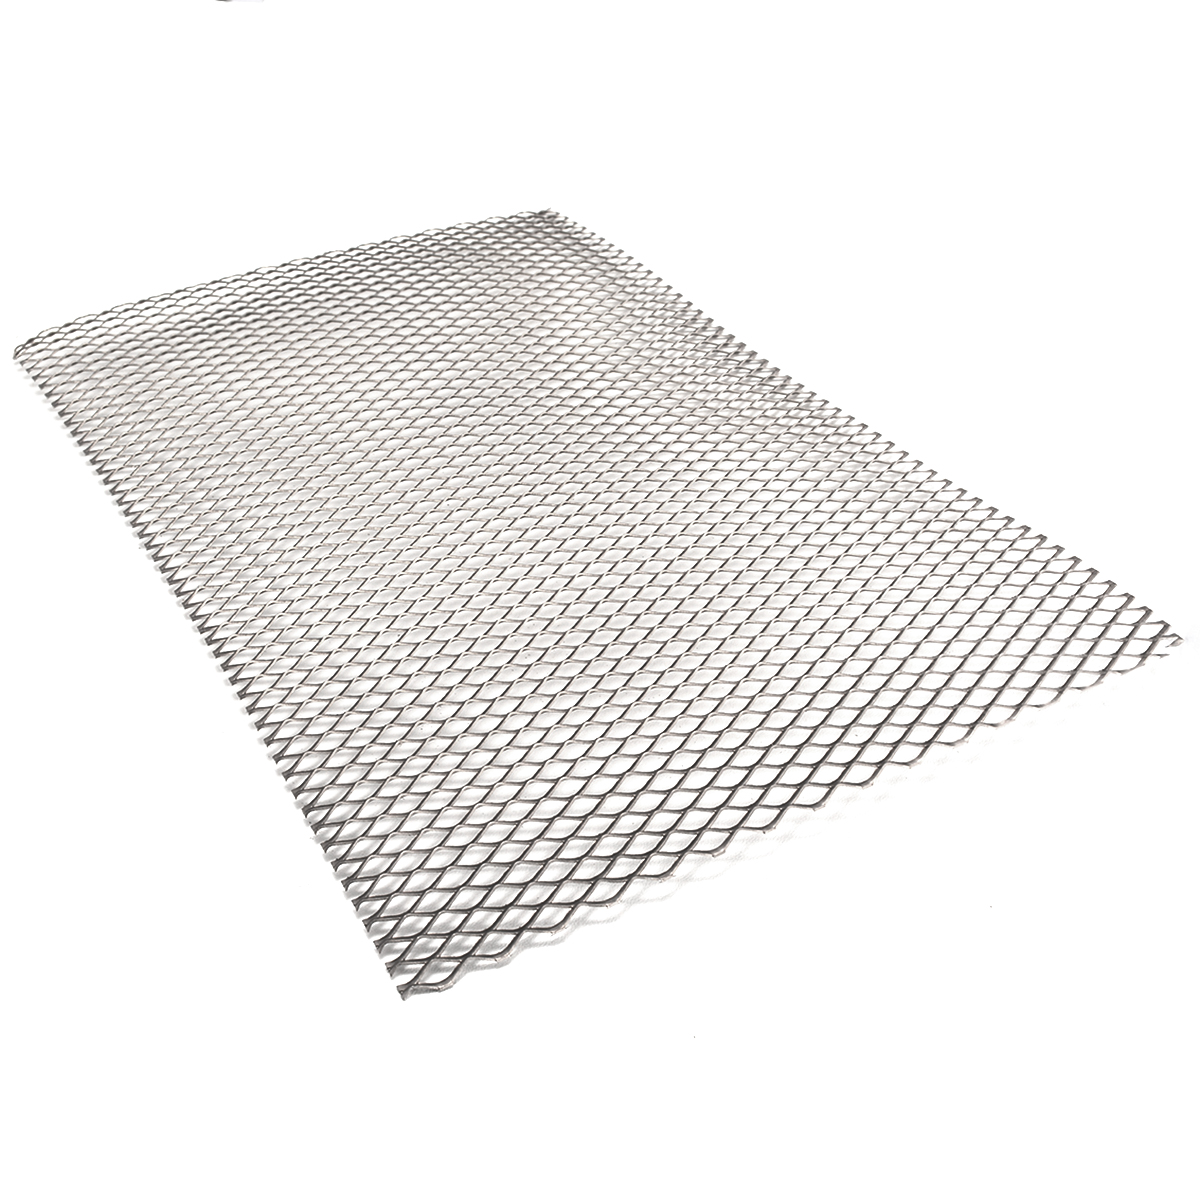 Corrosion Resistance Titanium Mesh 200mm*300mm*0.5mm Durable Metal Titanium Sheet Perforated Plate Expanded